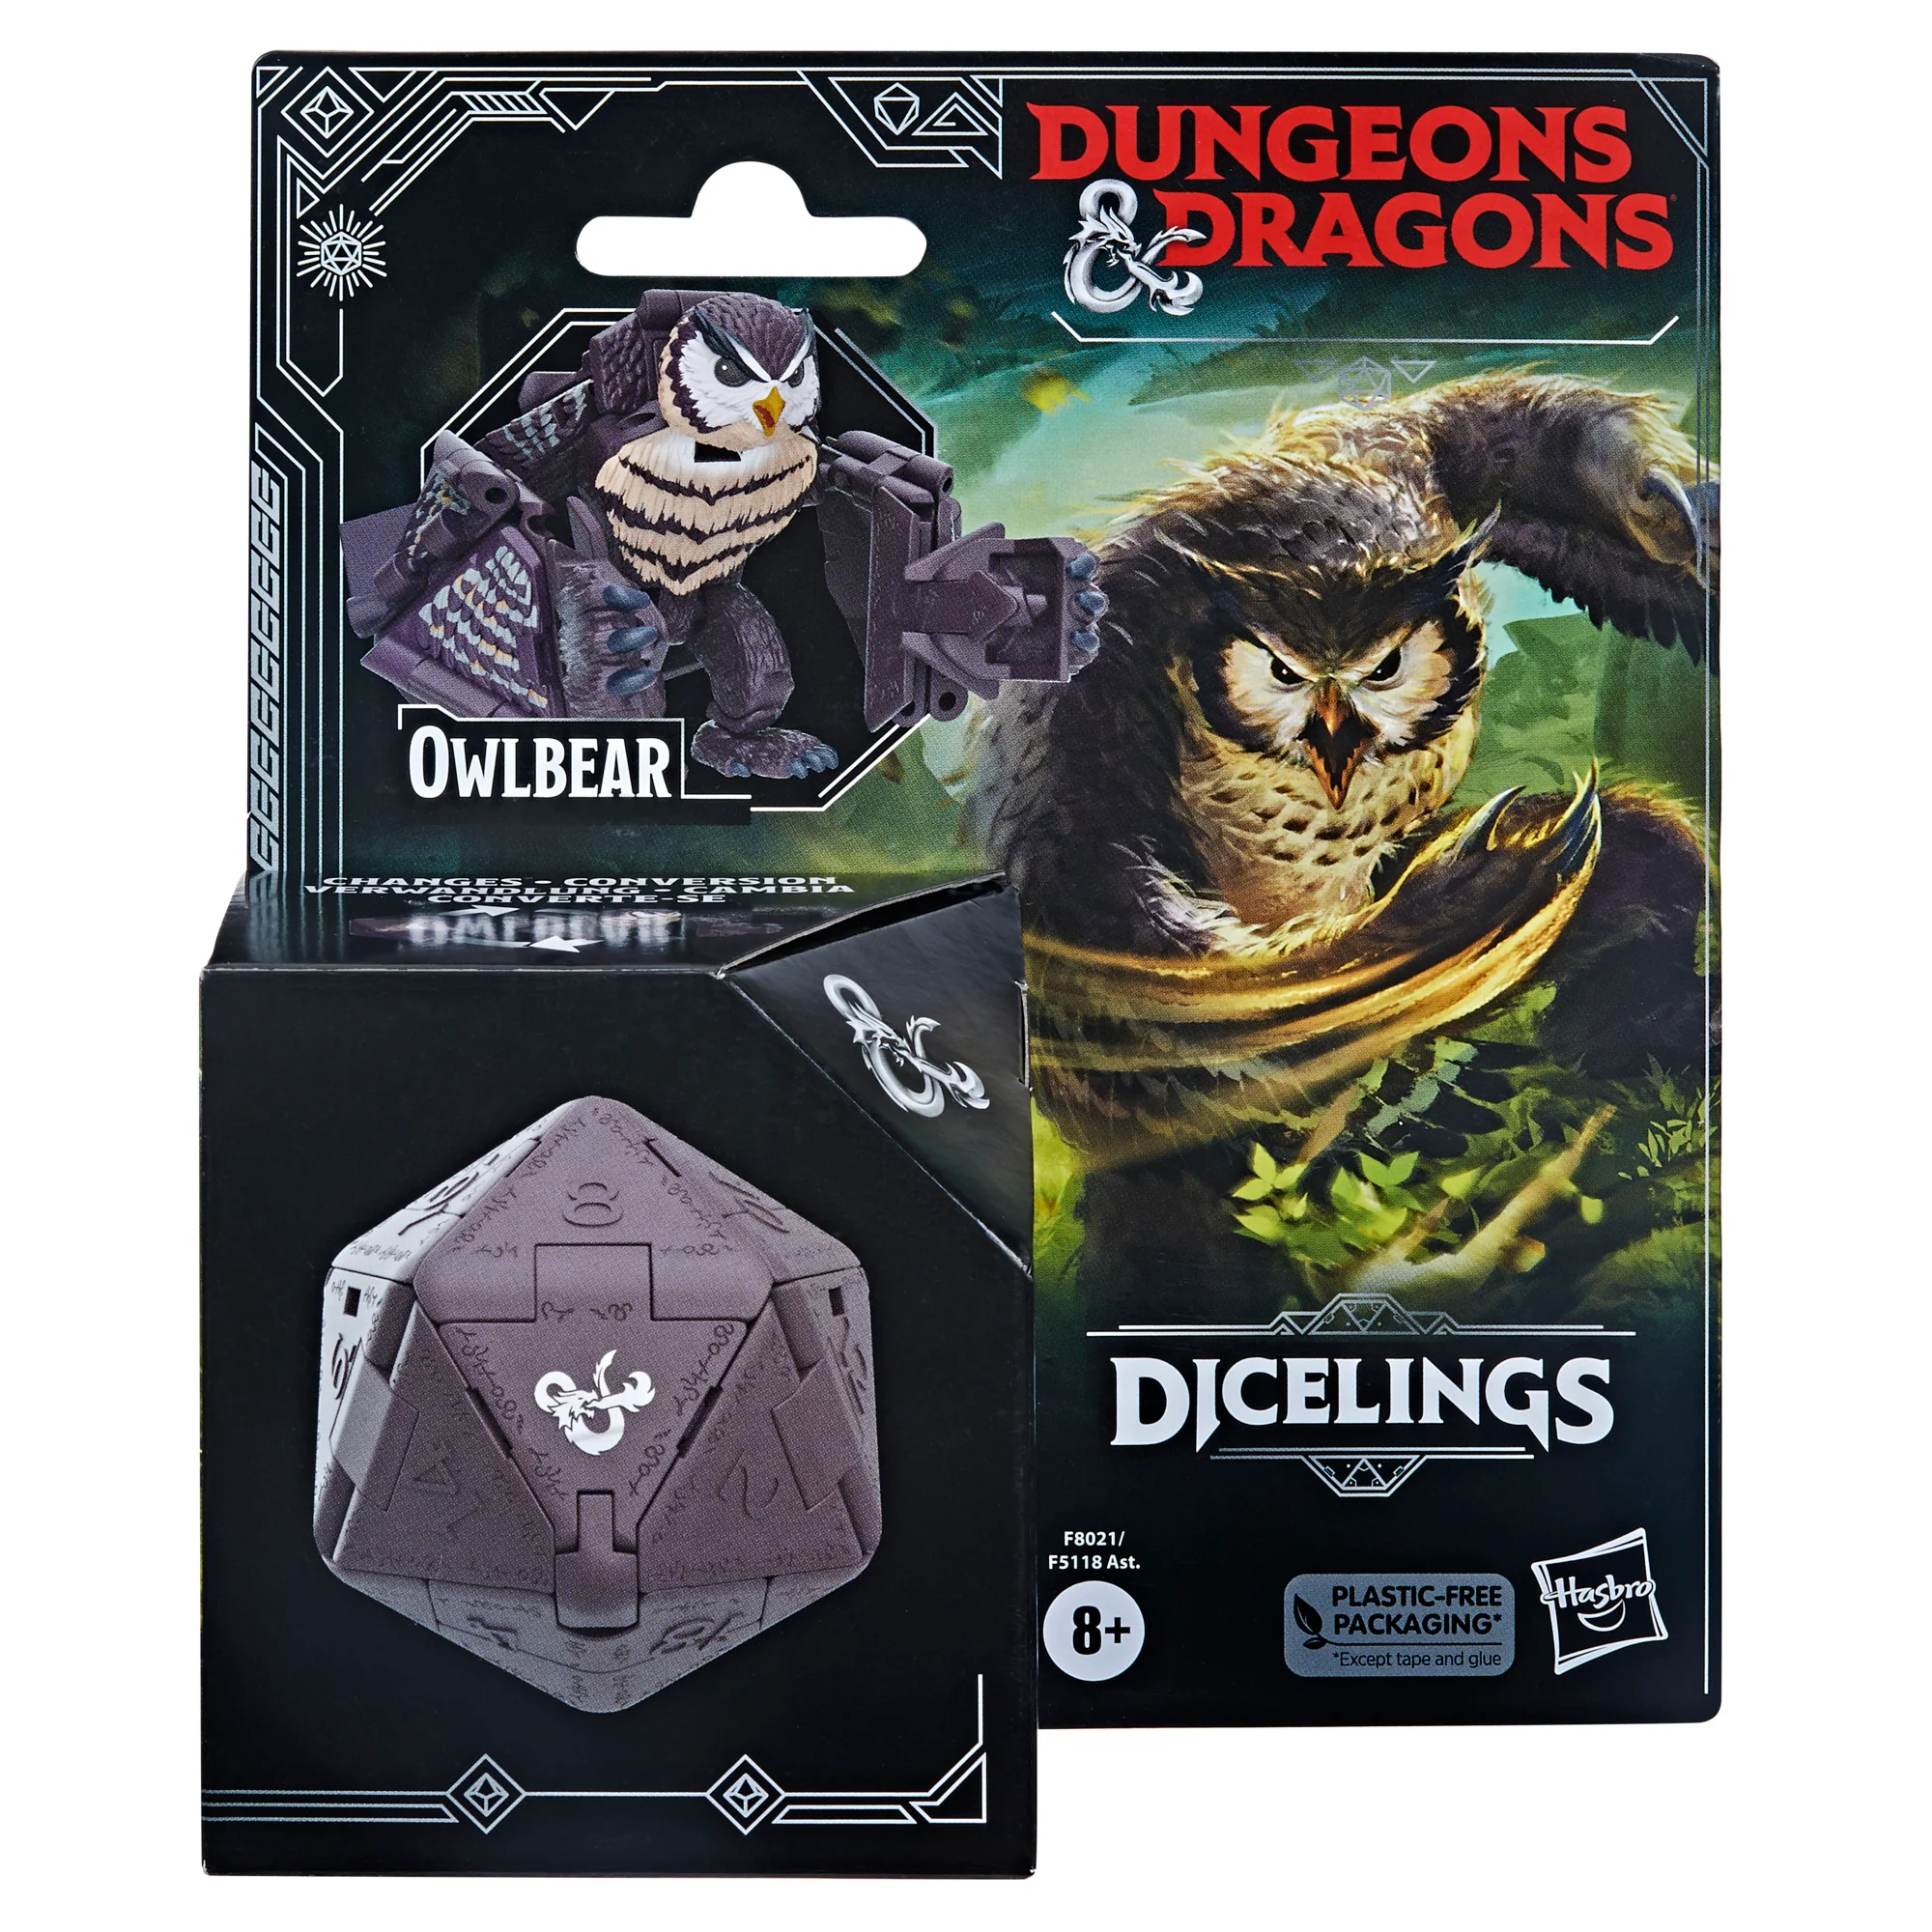 Dungeons & Dragons Dicelings Brown Owlbear Collected Fig Case